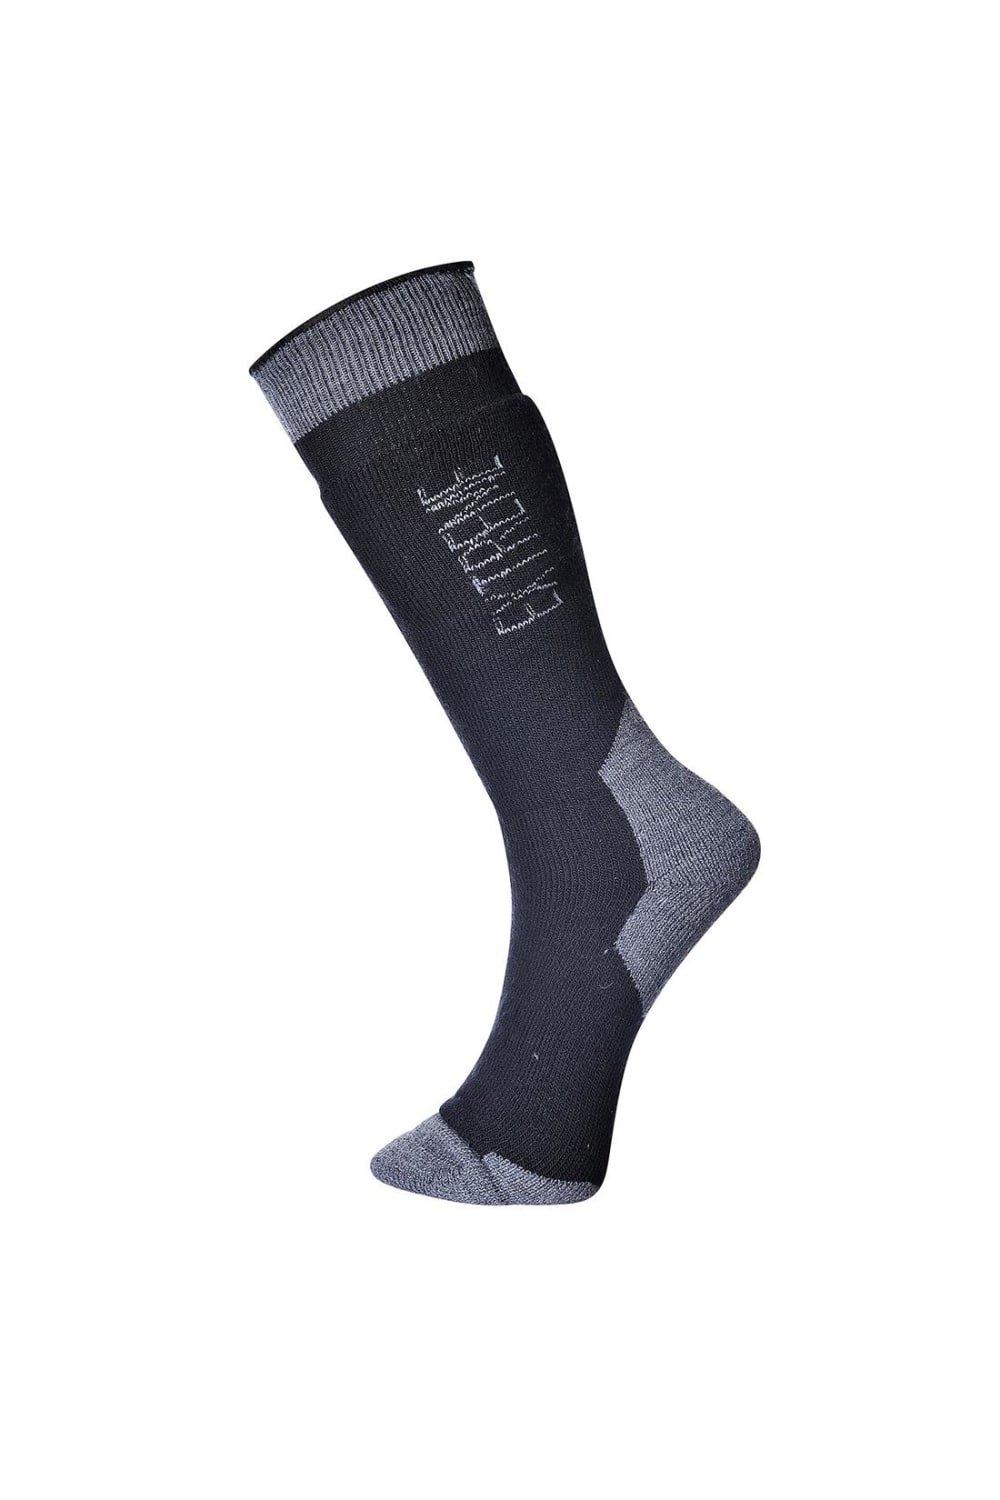 Extreme Cold Weather Socks